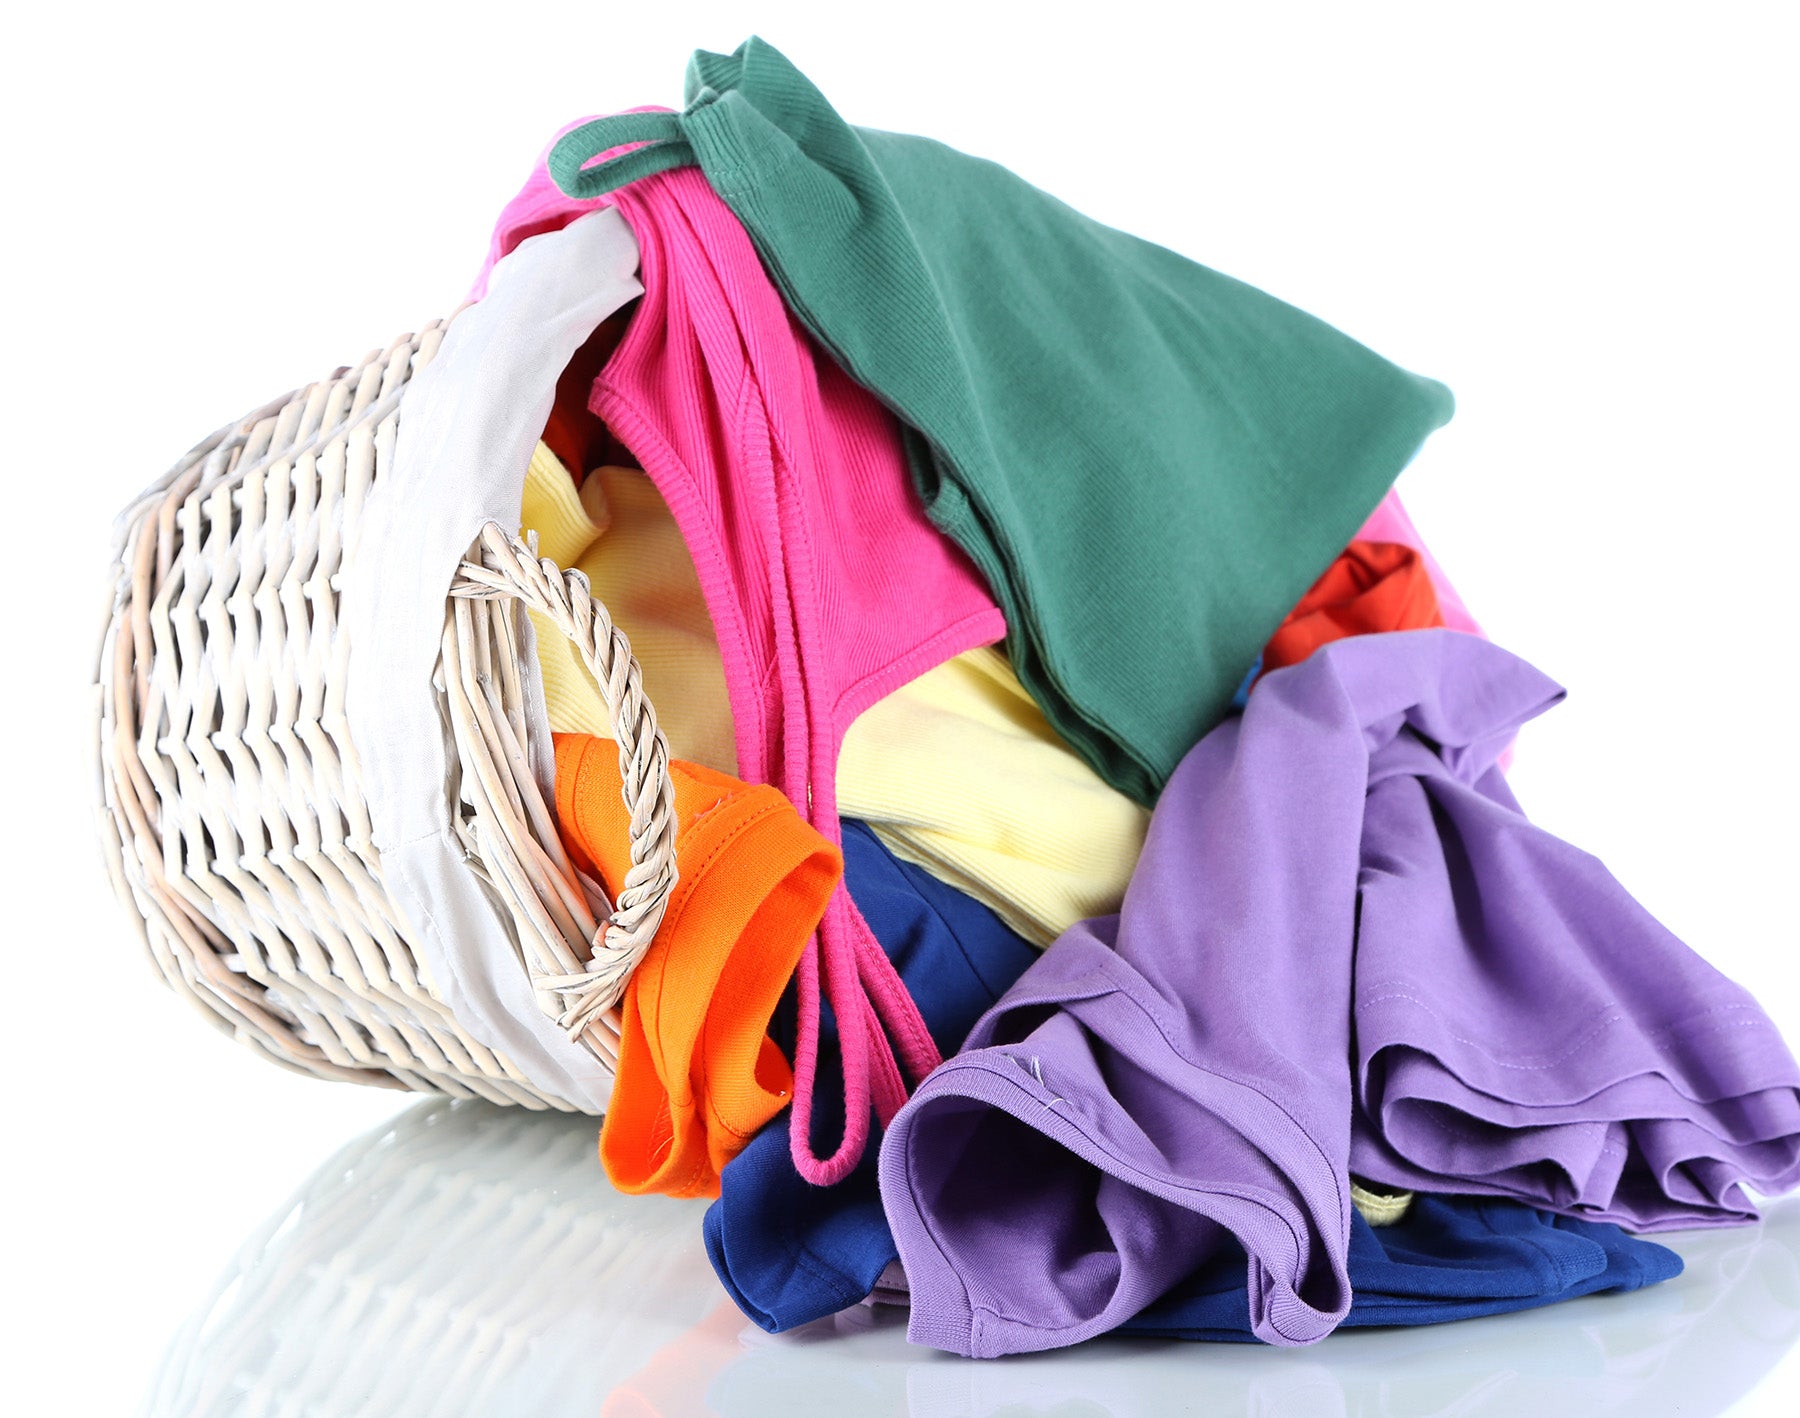 How To Care For Your Clothes